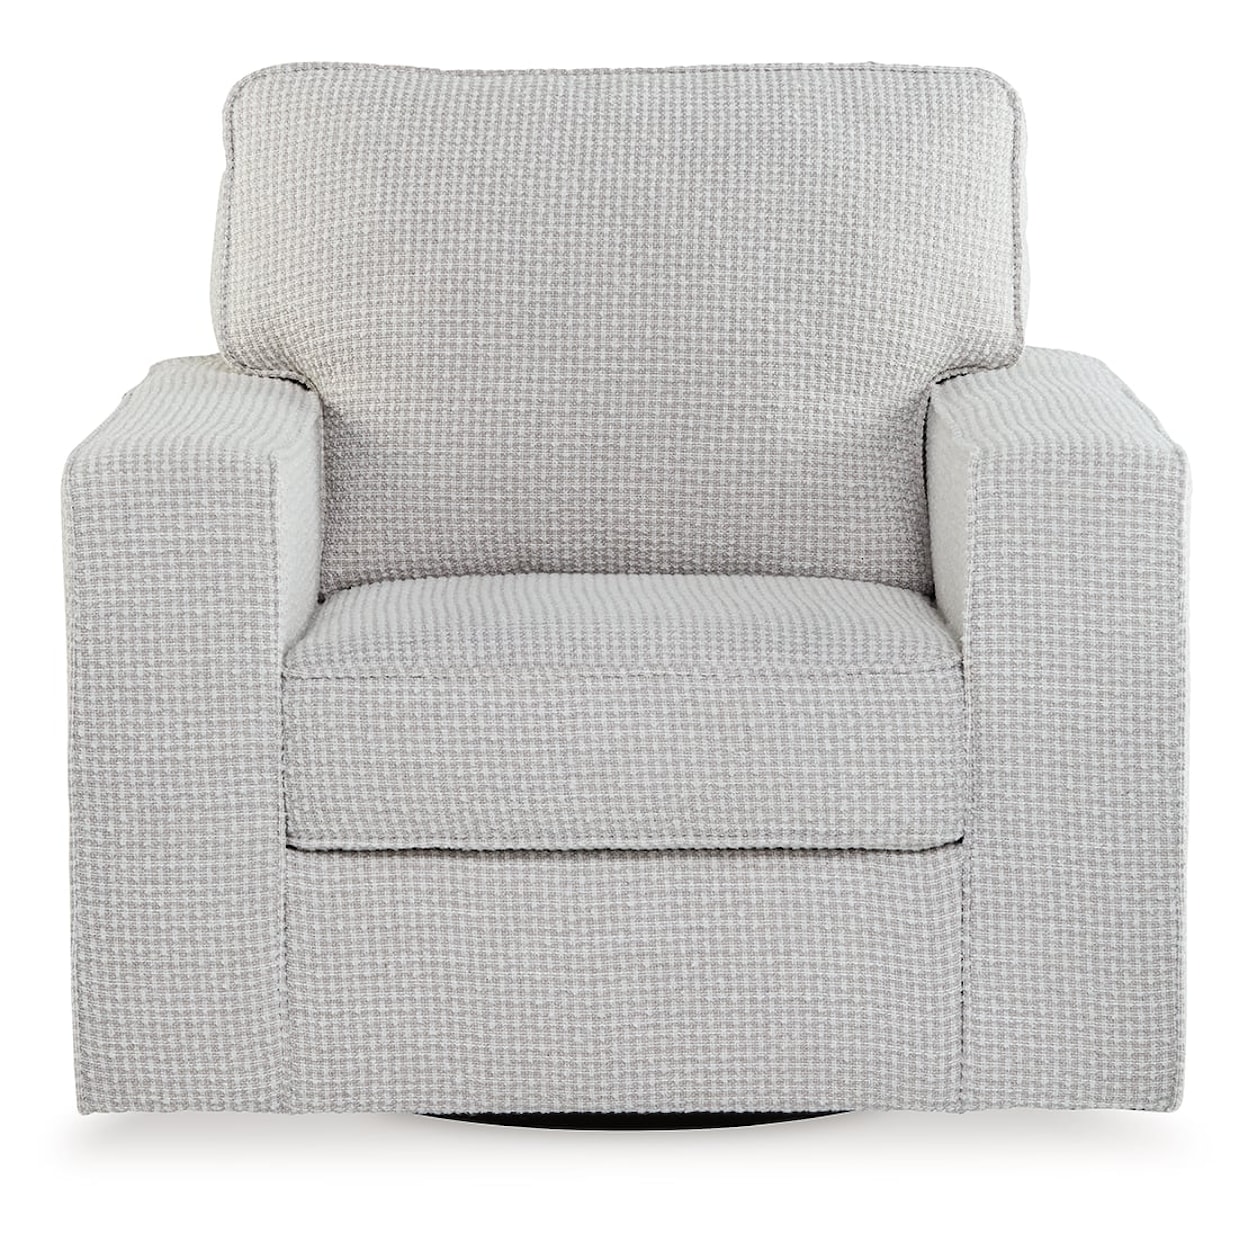 Signature Design by Ashley Olwenburg Swivel Accent Chair